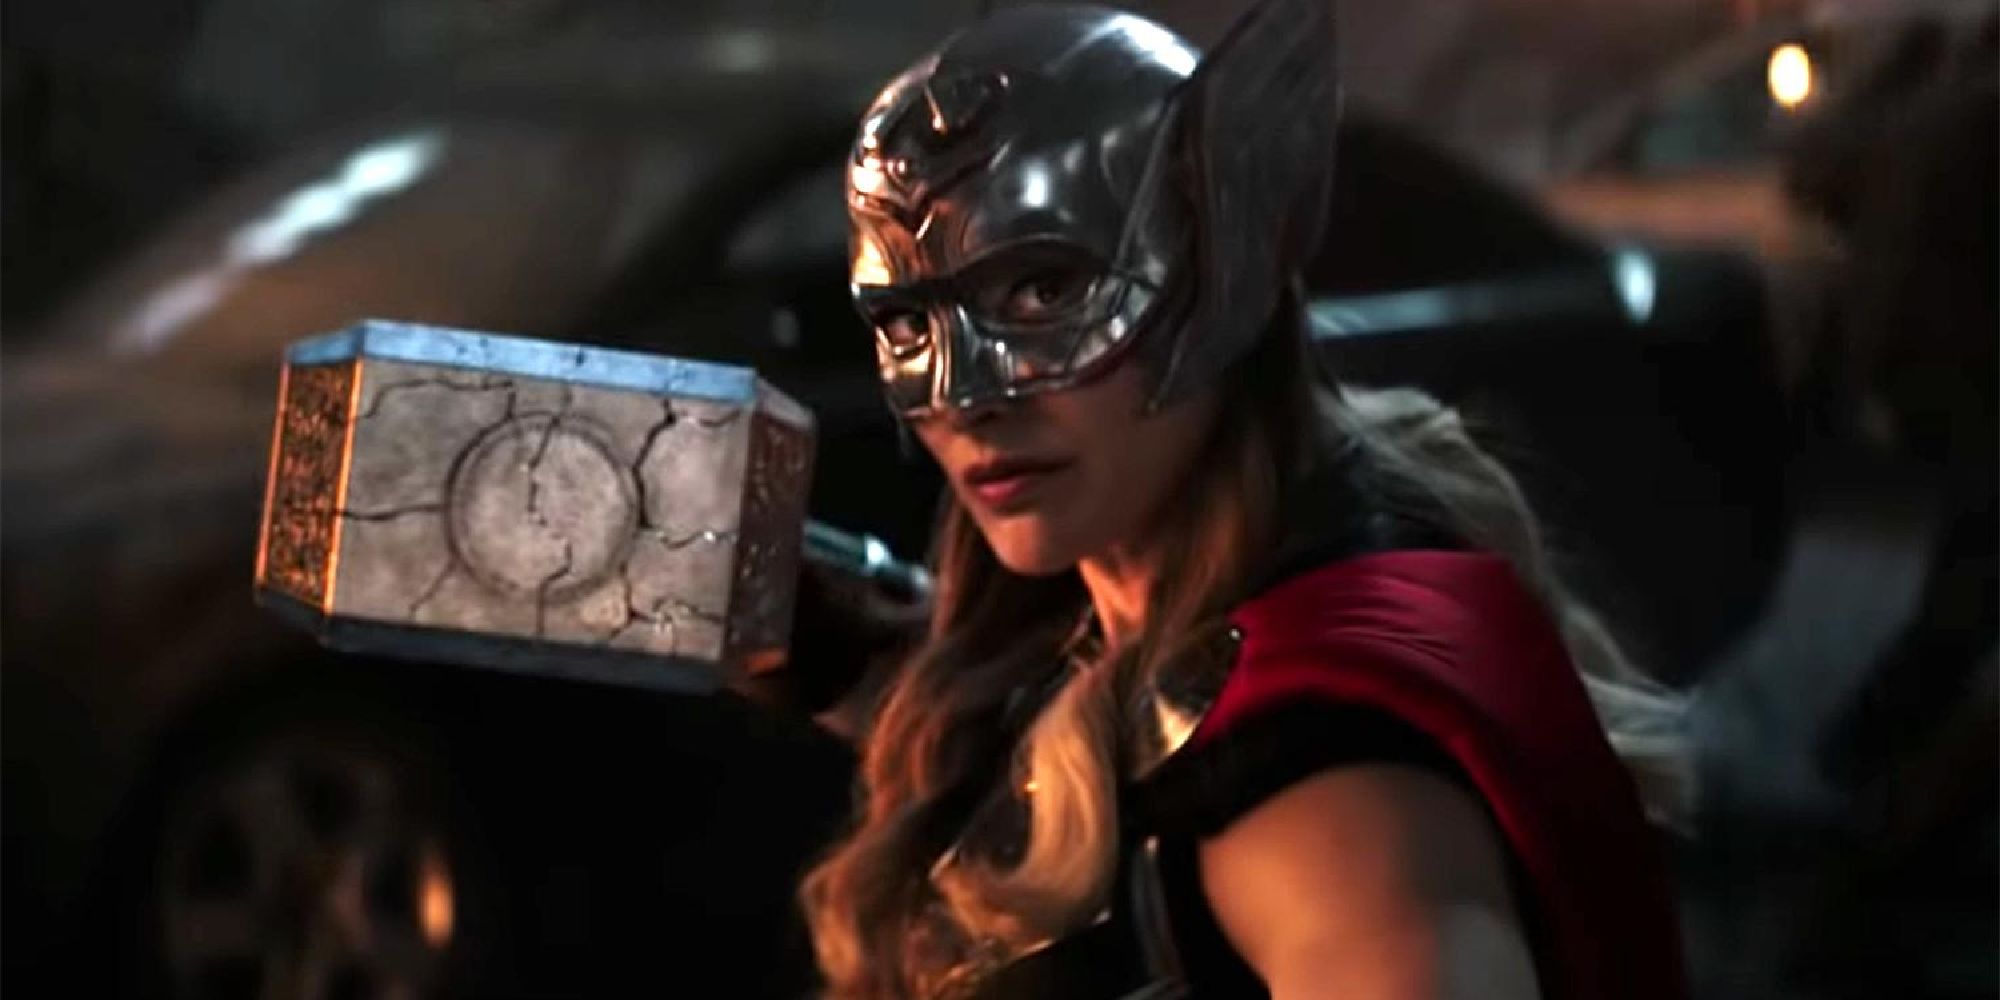 Natalie Portman as Jane Foster dressed as Thor and wielding Mjolnir in battle